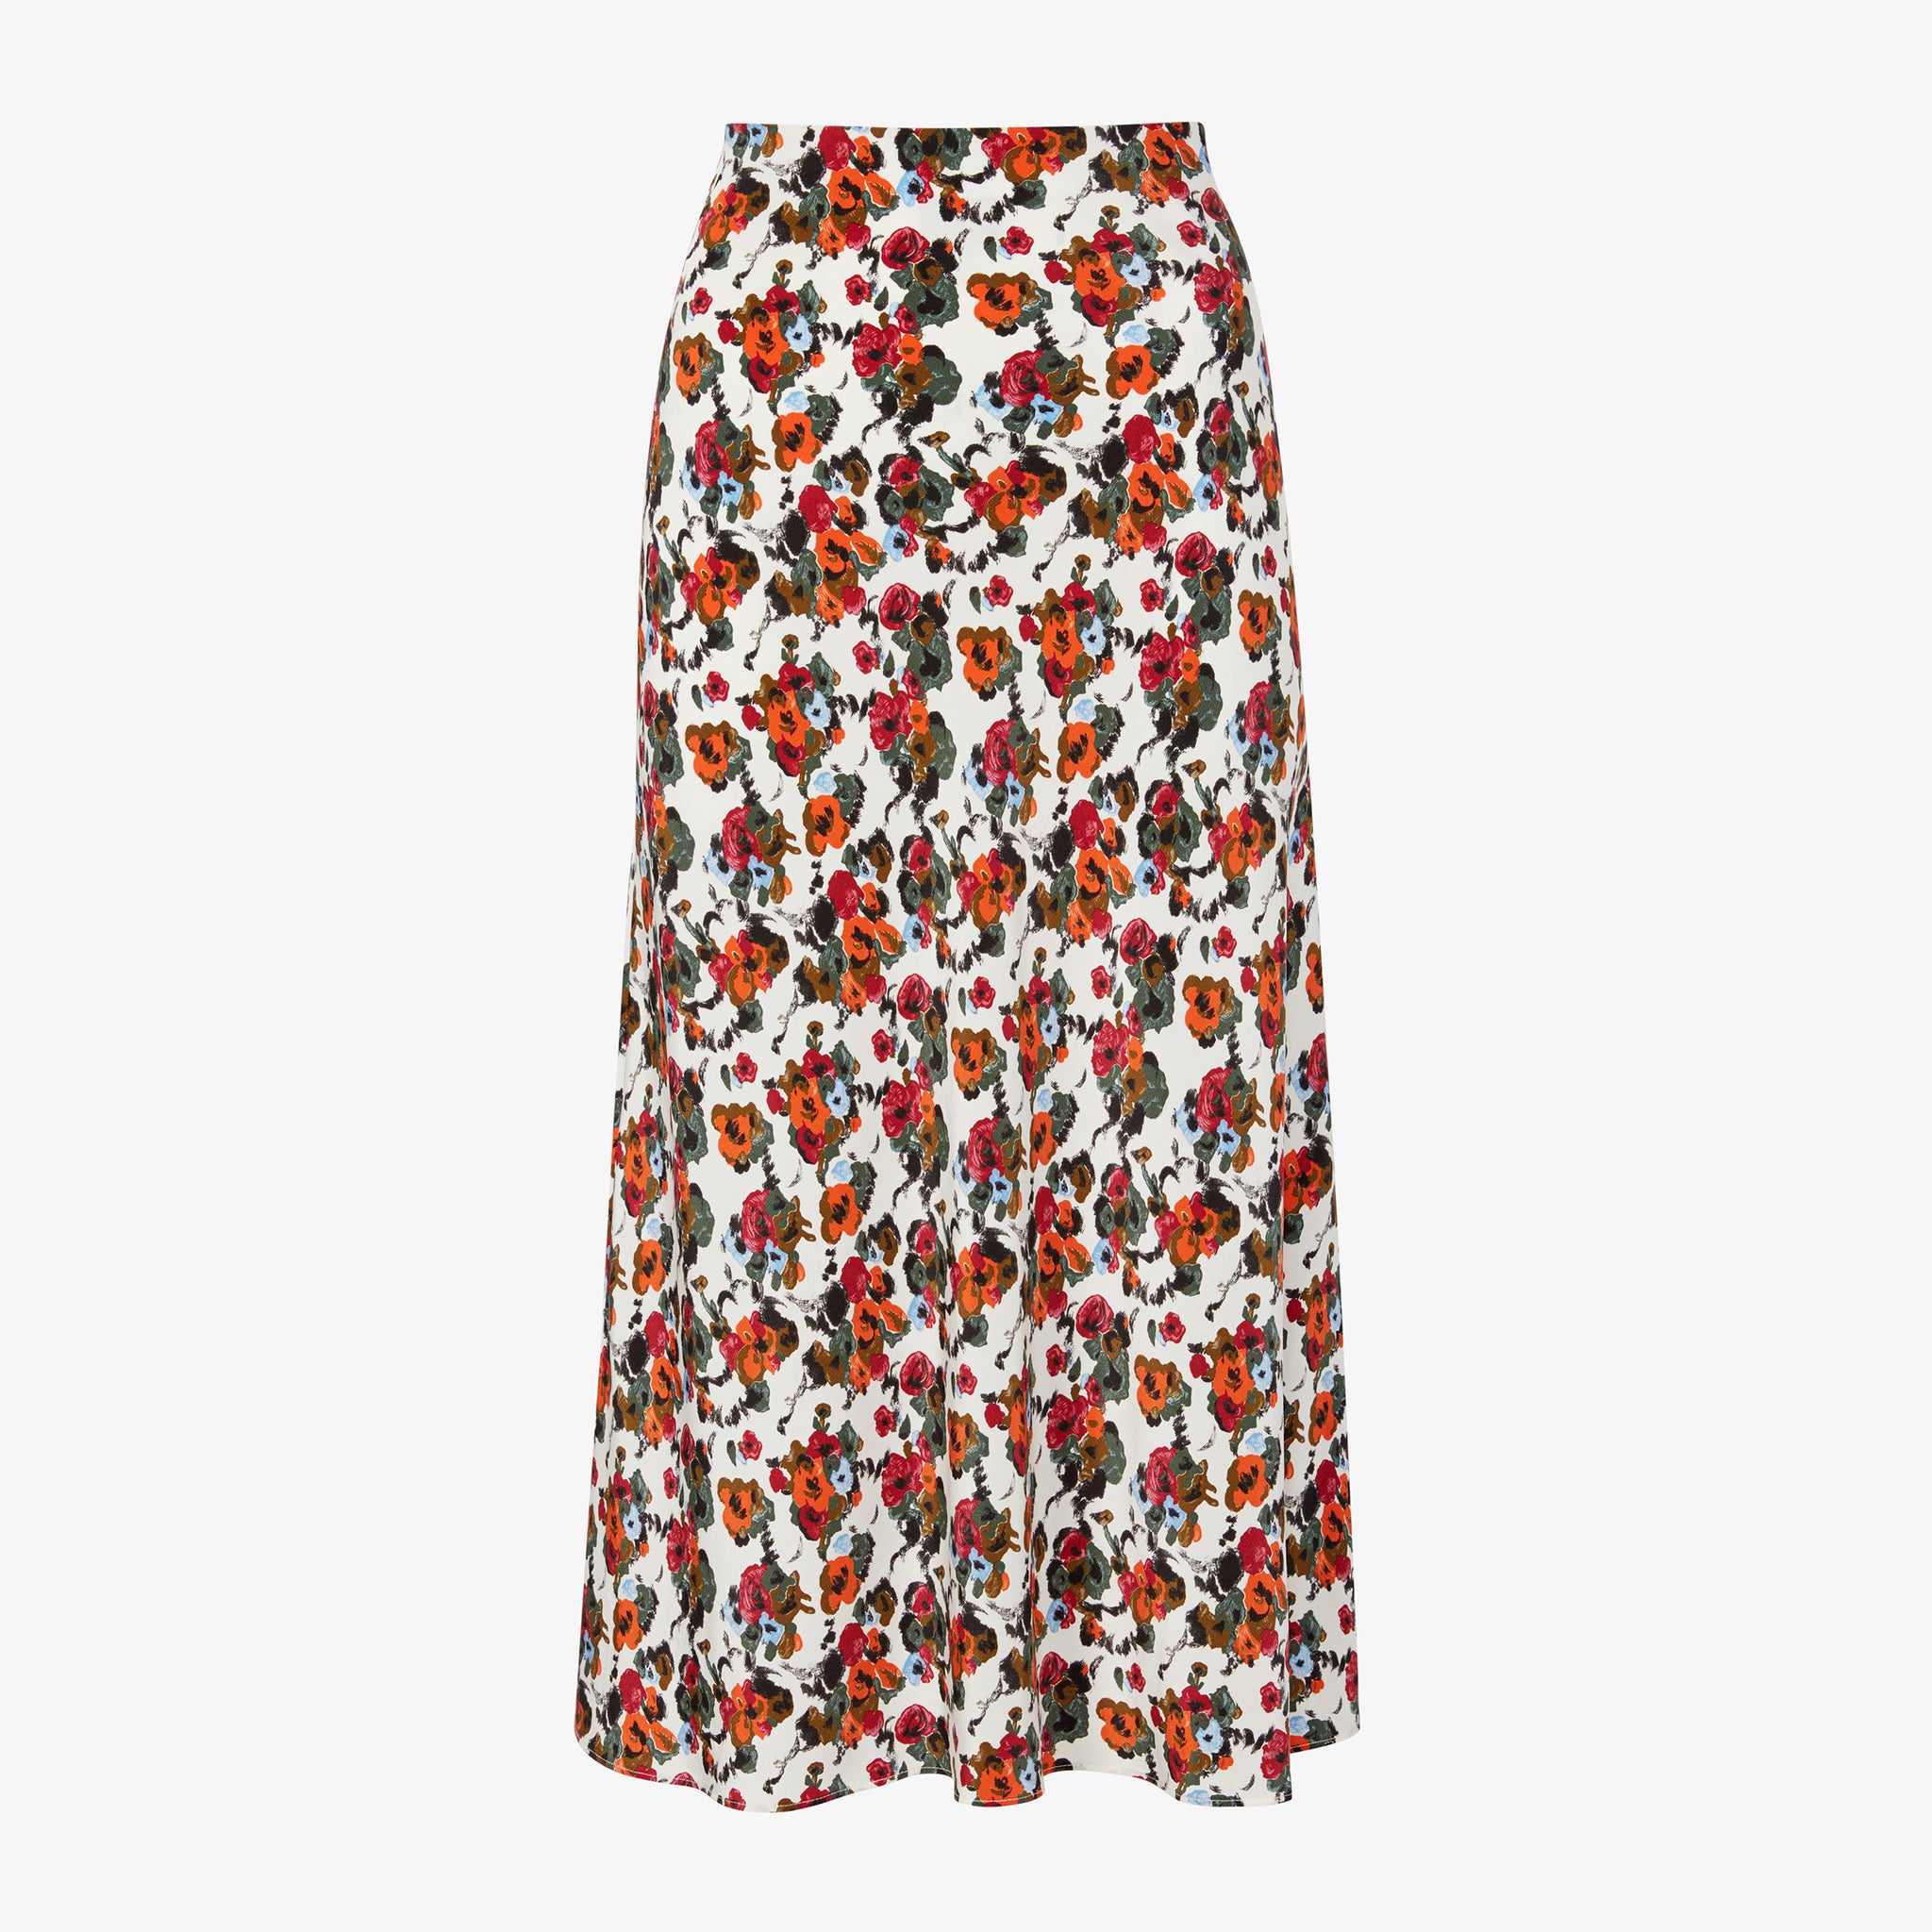 Packshot image of the Orchard Skirt - Washable Silk in Garden Print